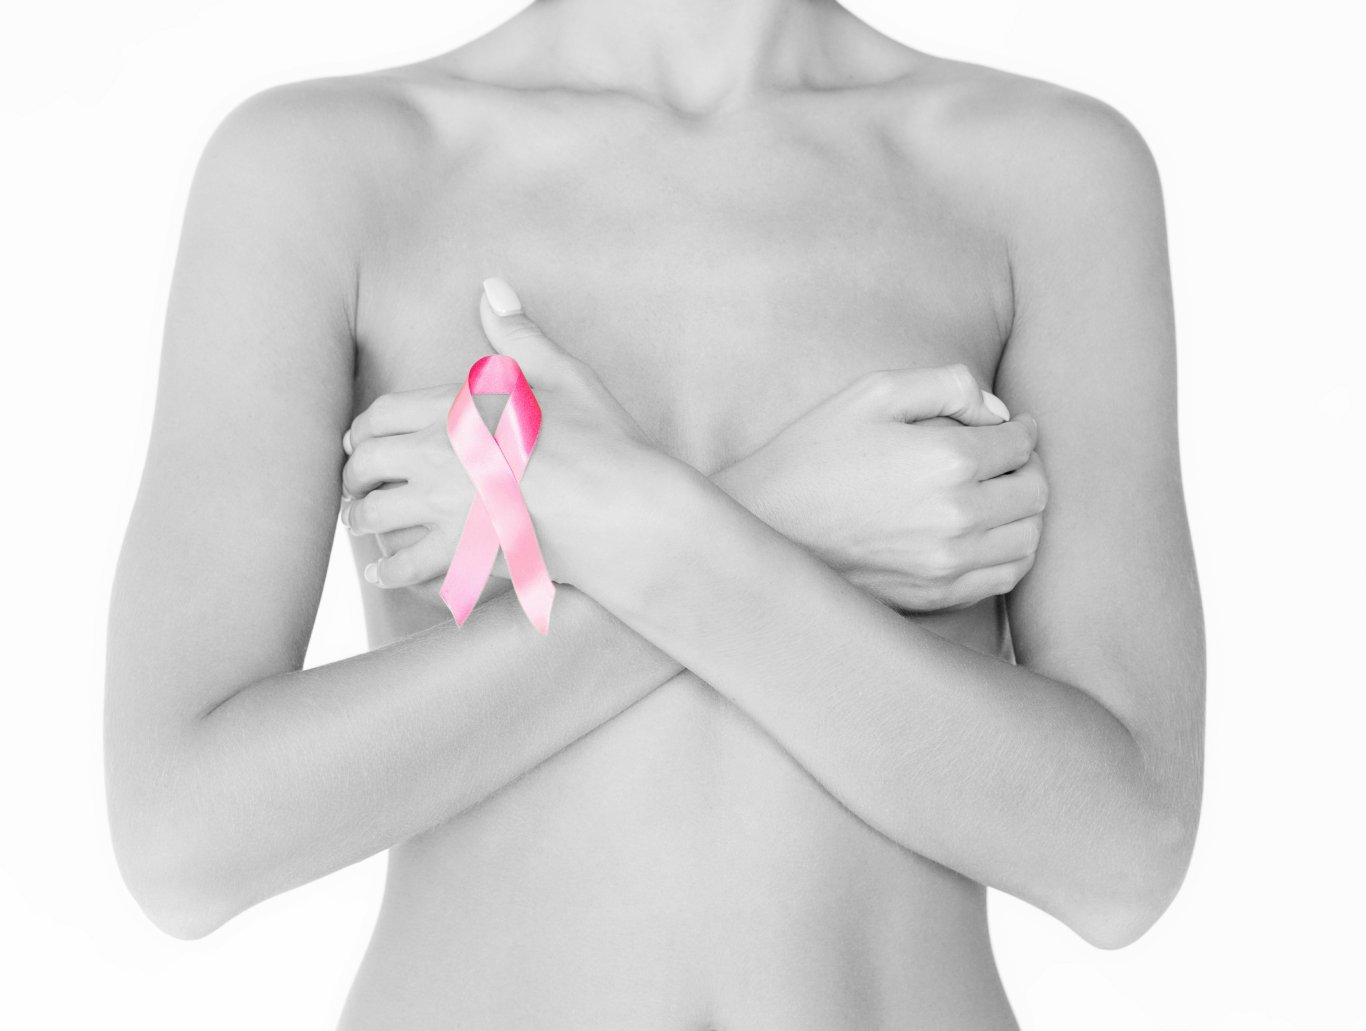 If you are looking for a breast reconstruction surgeon in South Carolina, please call board-certified plastic surgeon Dr. Ted Vaughn at 864-223-0505 today